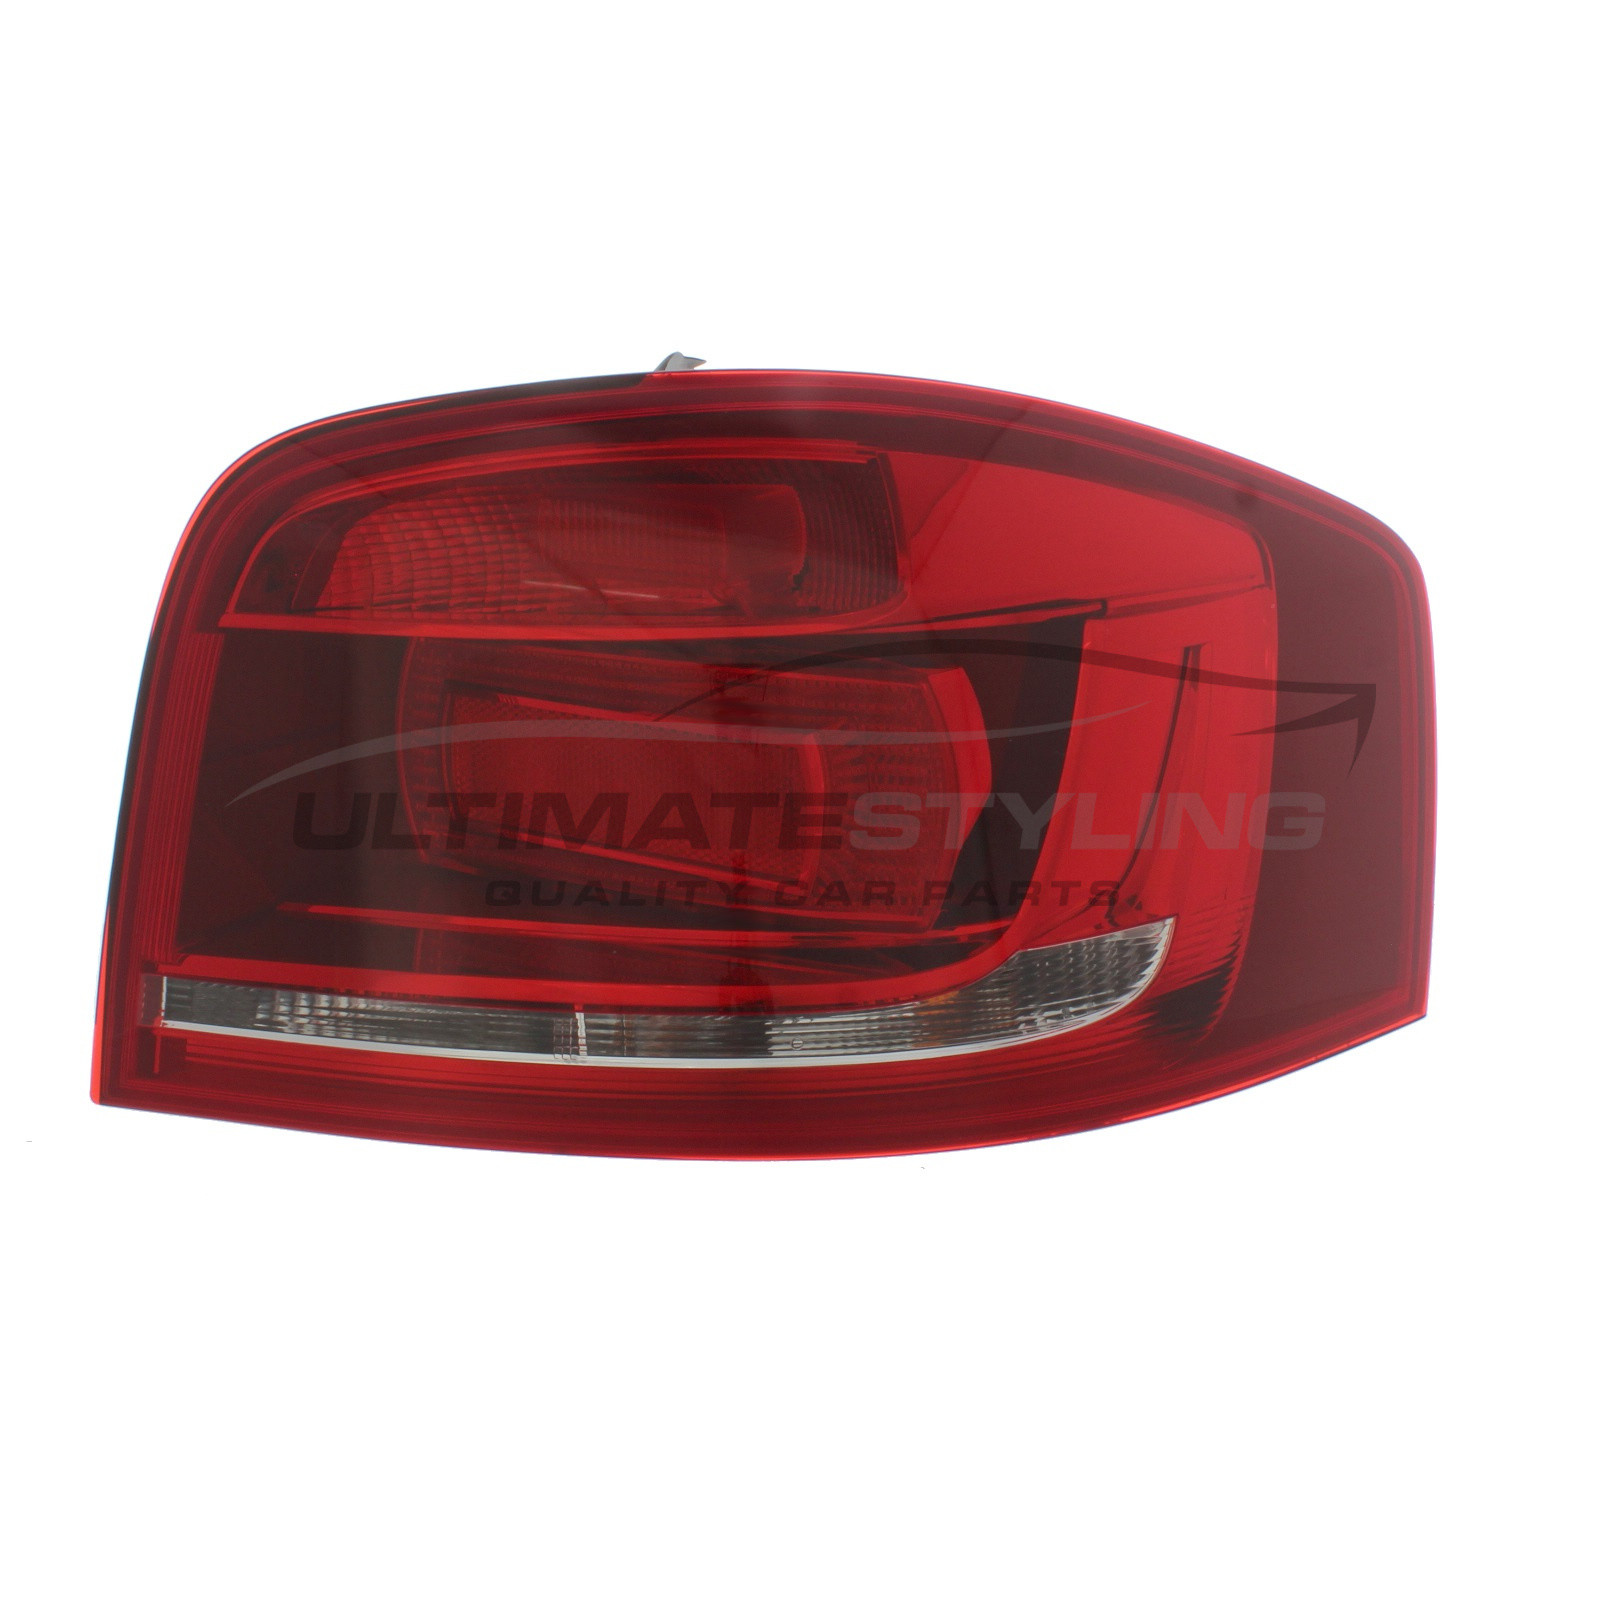 Audi A3 2008-2013 Non-LED Outer (Wing) Rear Light / Tail Light Including Bulb Holder Drivers Side (RH)